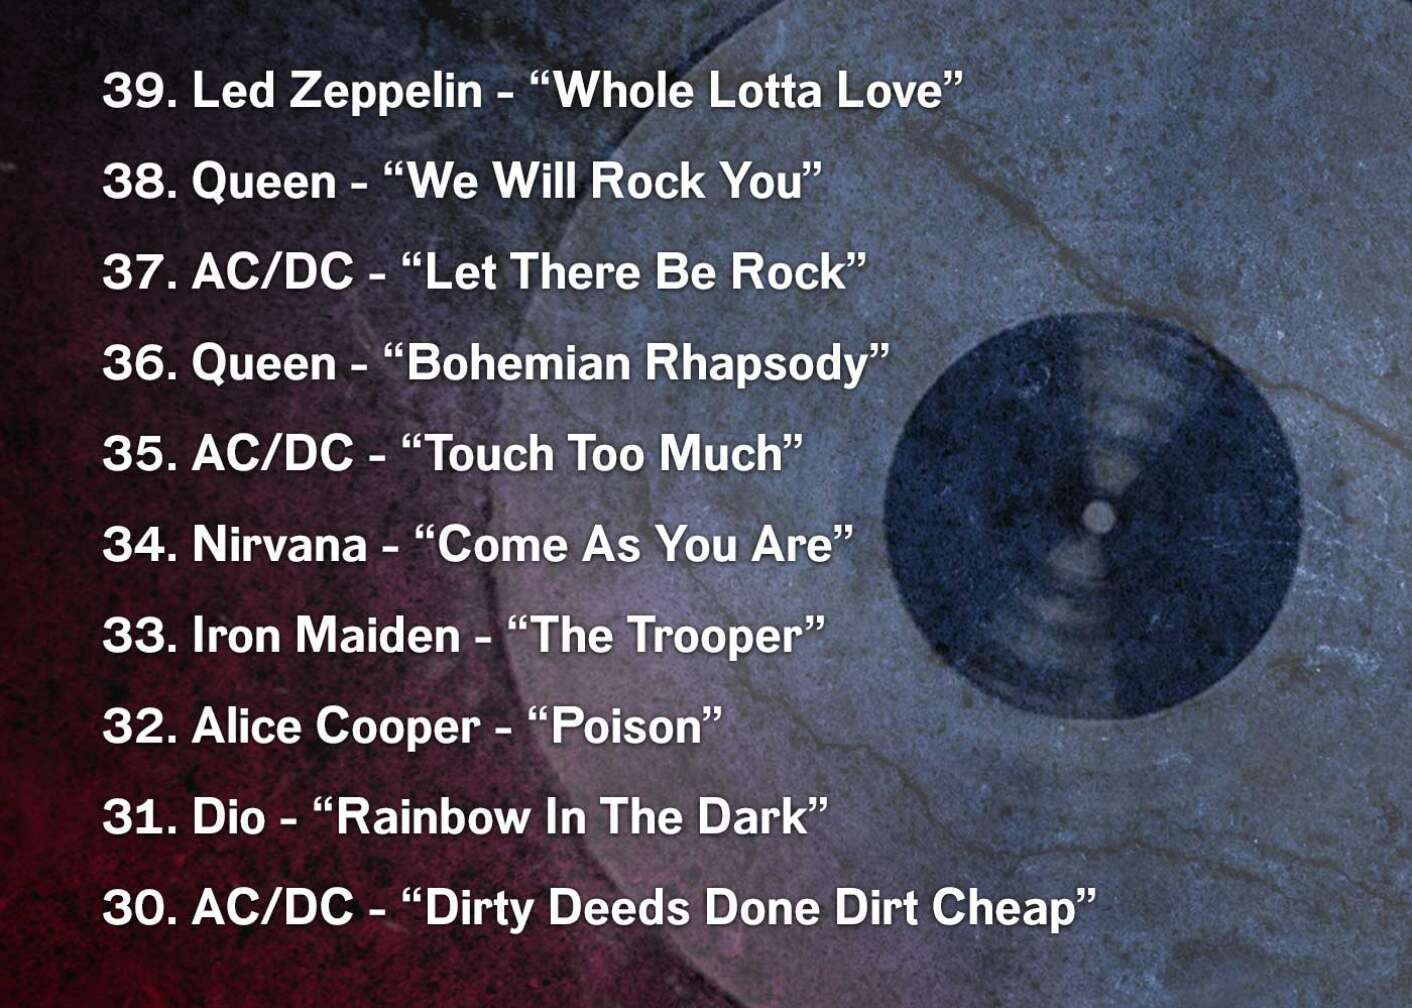 39. Led Zeppelin - “Whole Lotta Love” 38. Queen - “We Will Rock You” 37. AC/DC - “Let There Be Rock” 36. Queen - “Bohemian Rhapsody” 35. AC/DC - “Touch Too Much” 34. Nirvana - “Come As You Are” 33. Iron Maiden - “The Trooper” 32. Alice Cooper - “Poison” 31. Dio - “Rainbow In The Dark” 30. AC/DC - “Dirty Deeds Done Dirt Cheap”